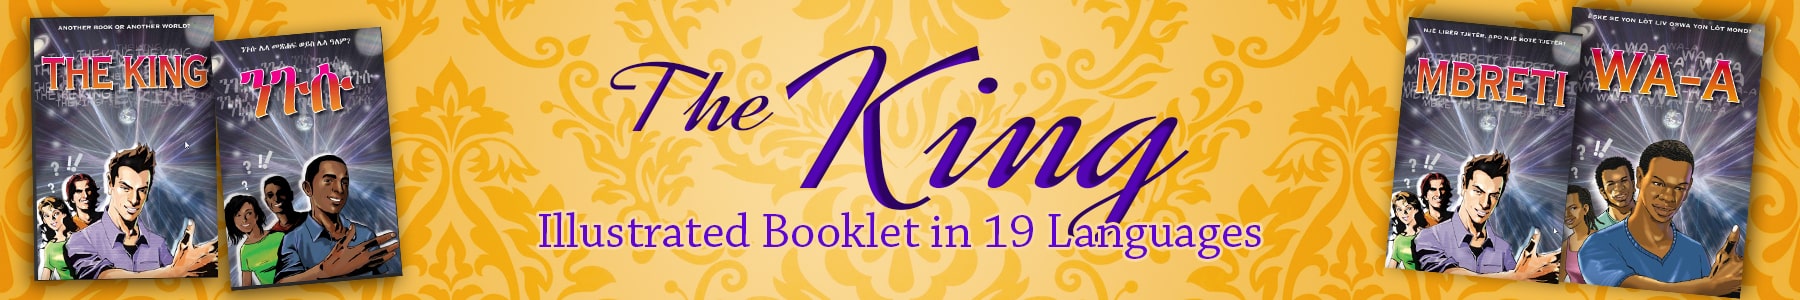 The King illustrated Booklet in 19 Languages